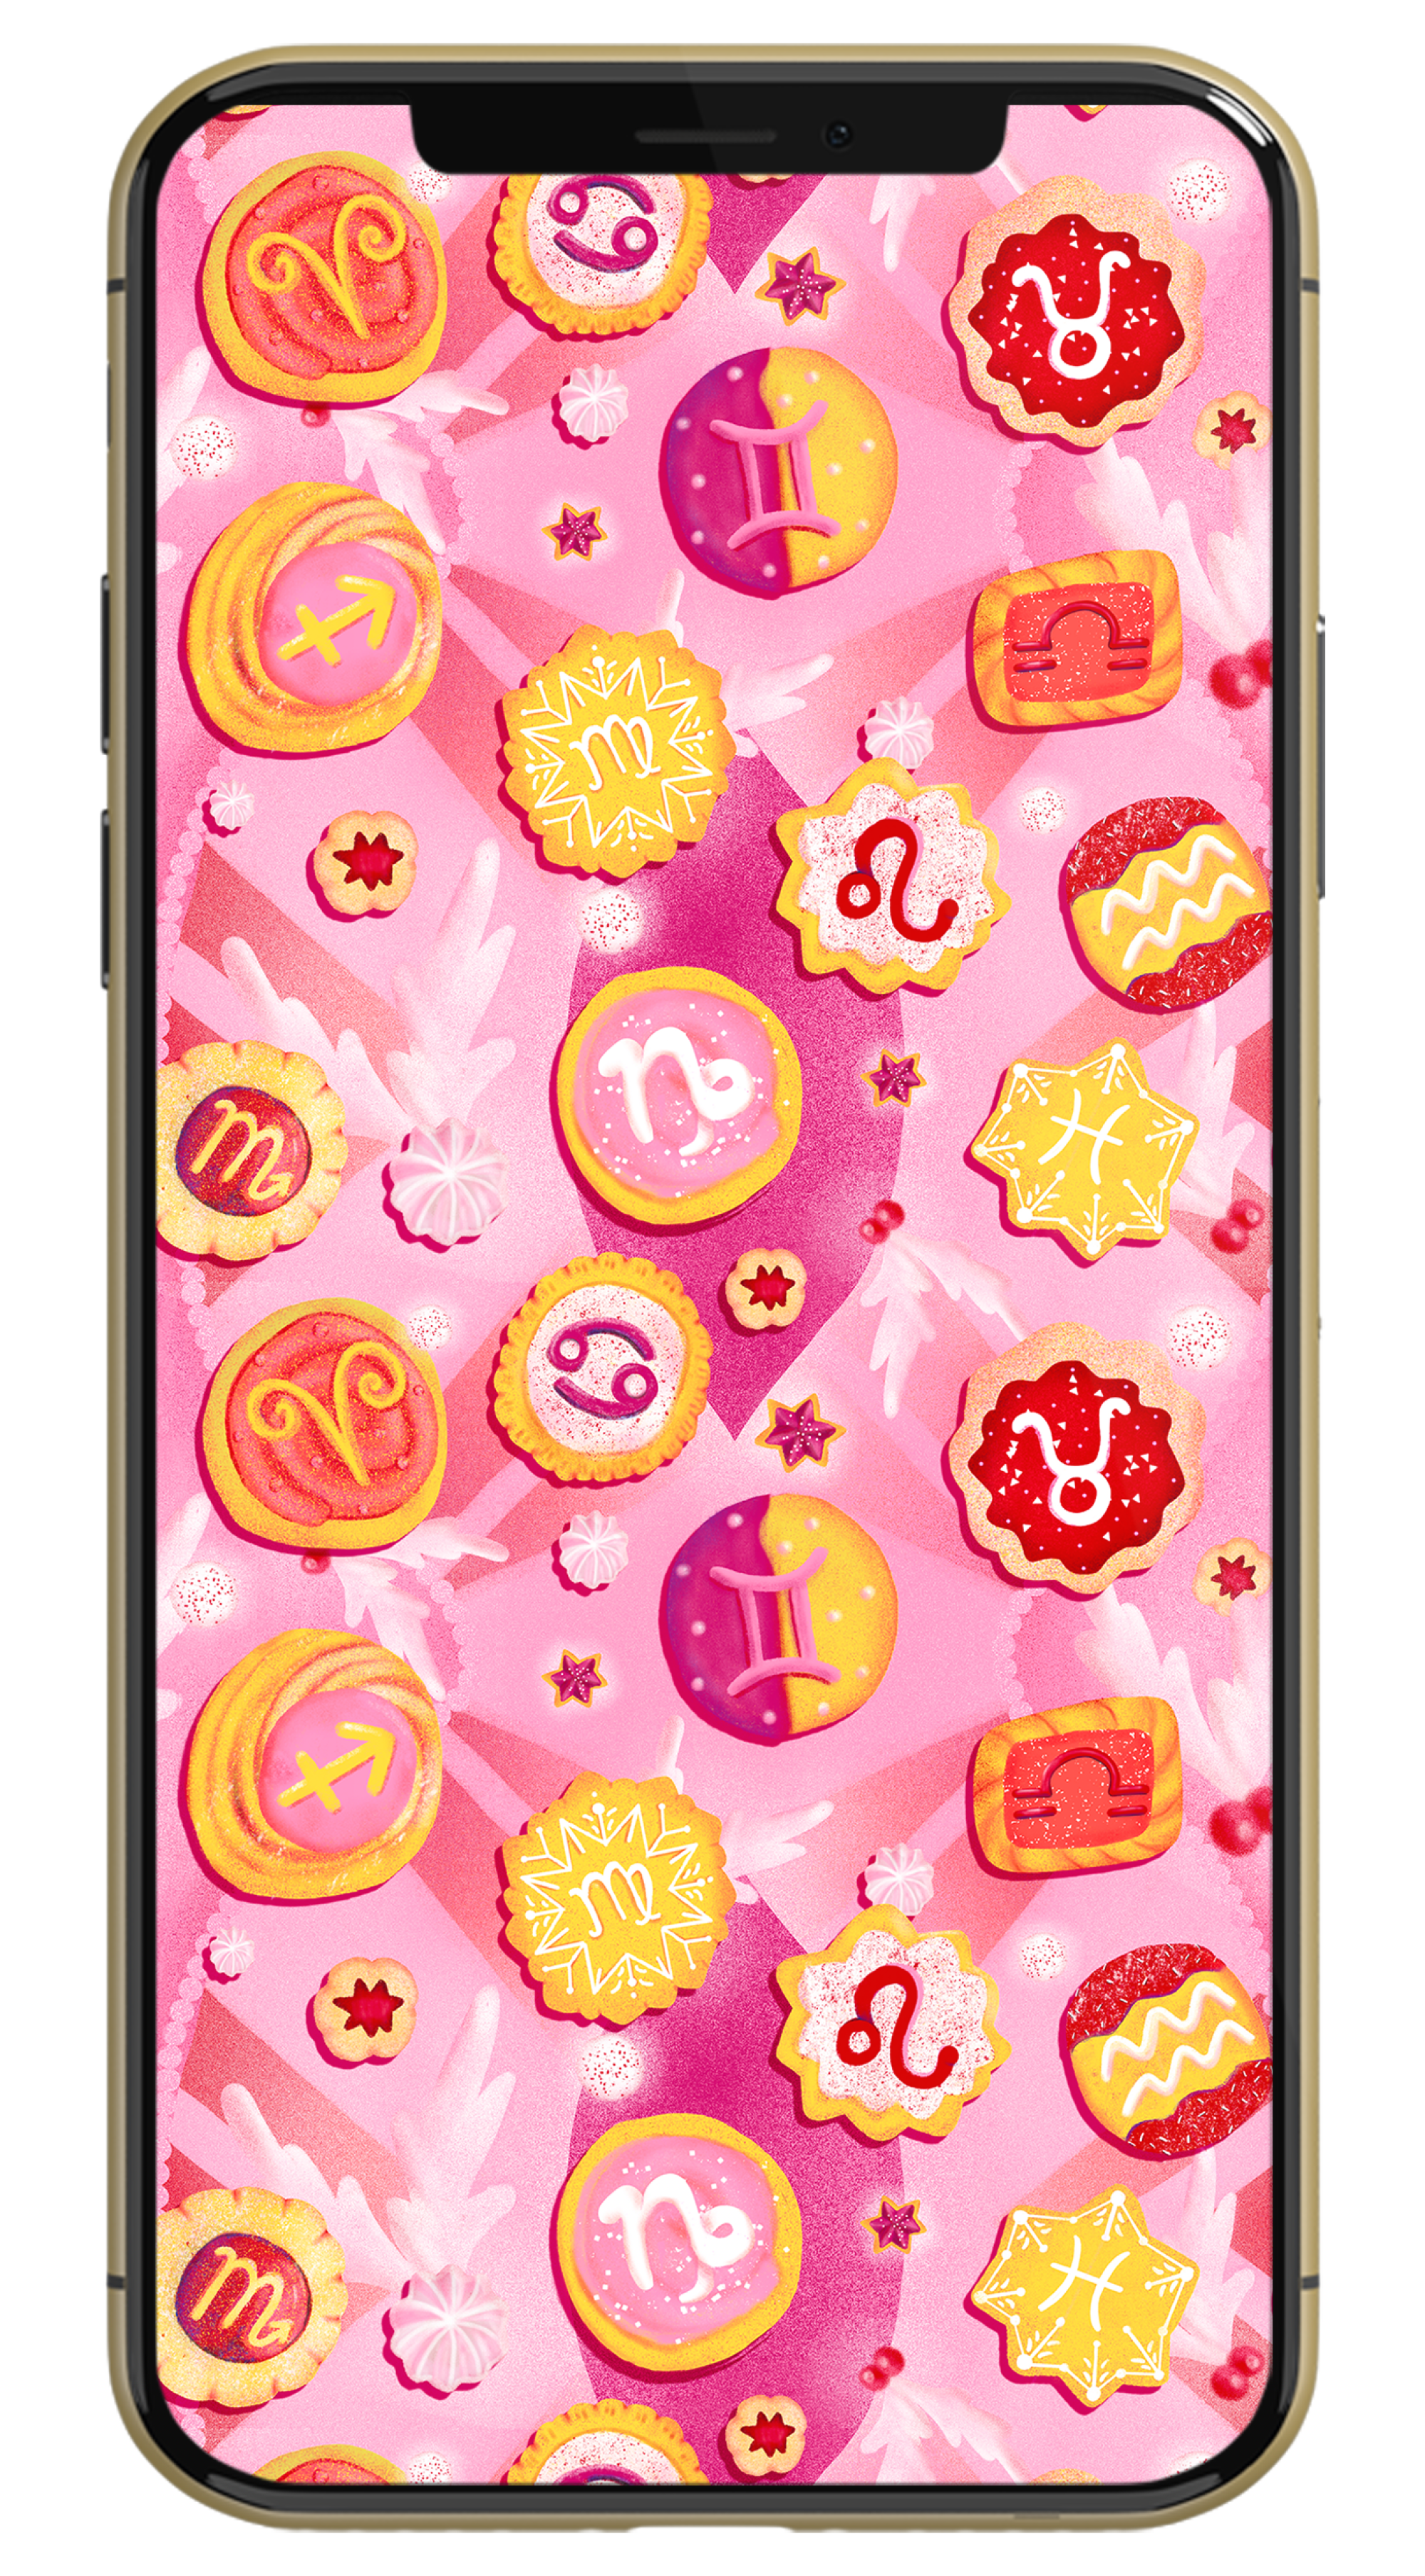 Wallpaper on an Iphone of Christmas cookies decorated with astrological signs. 